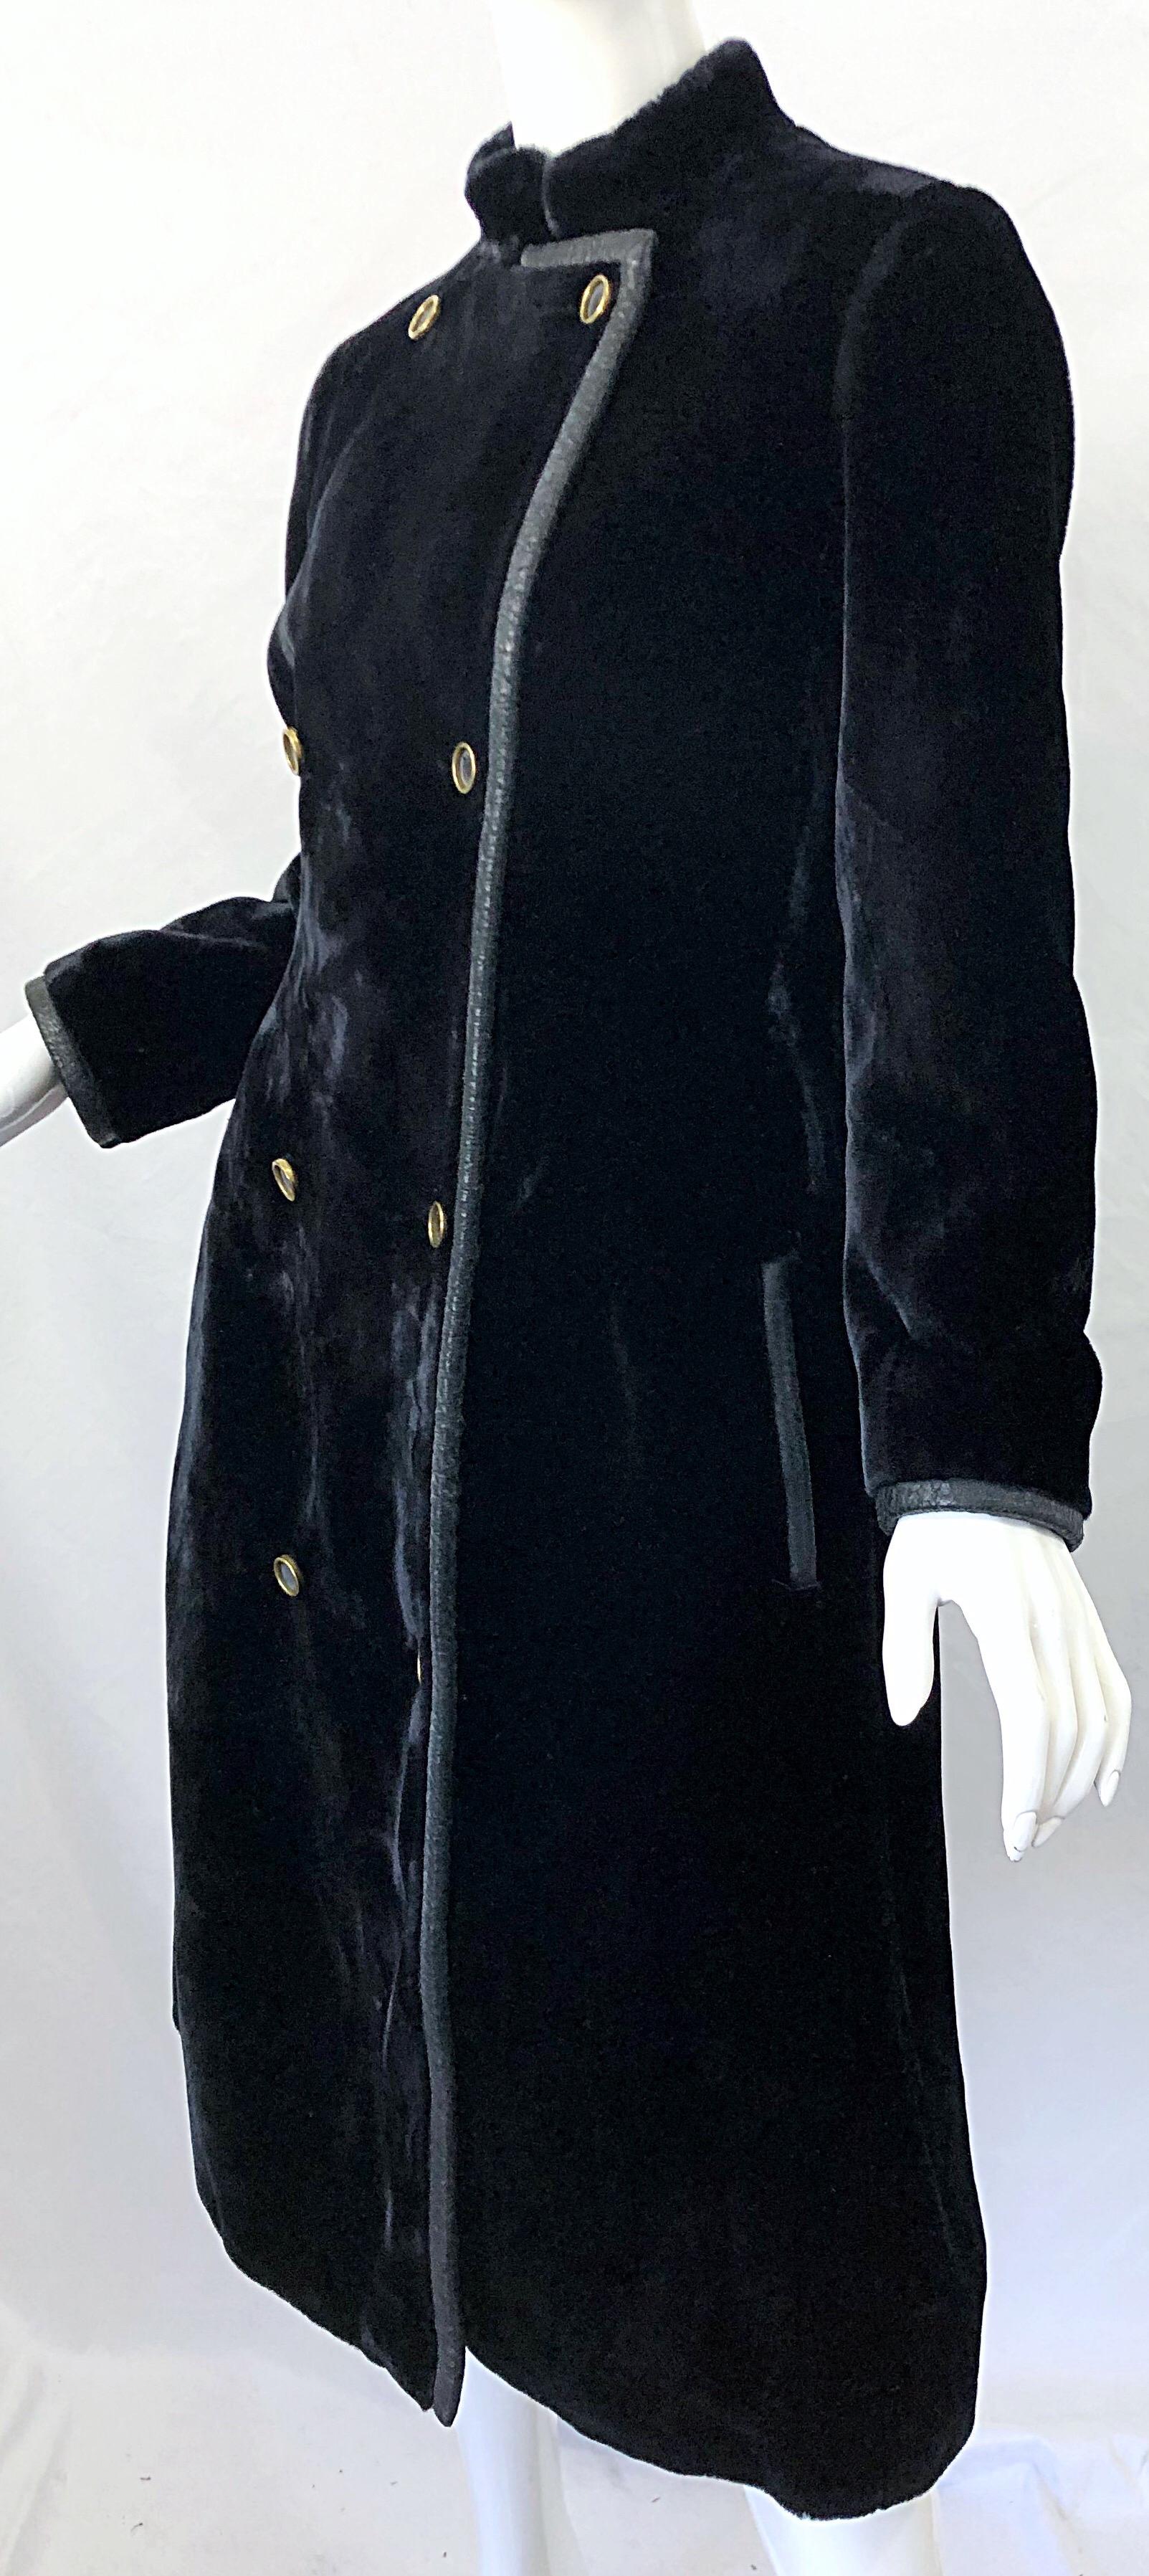 Givenchy 1960s Faux Fur Black Double Breasted Vintage 60s Swing Jacket Coat 8